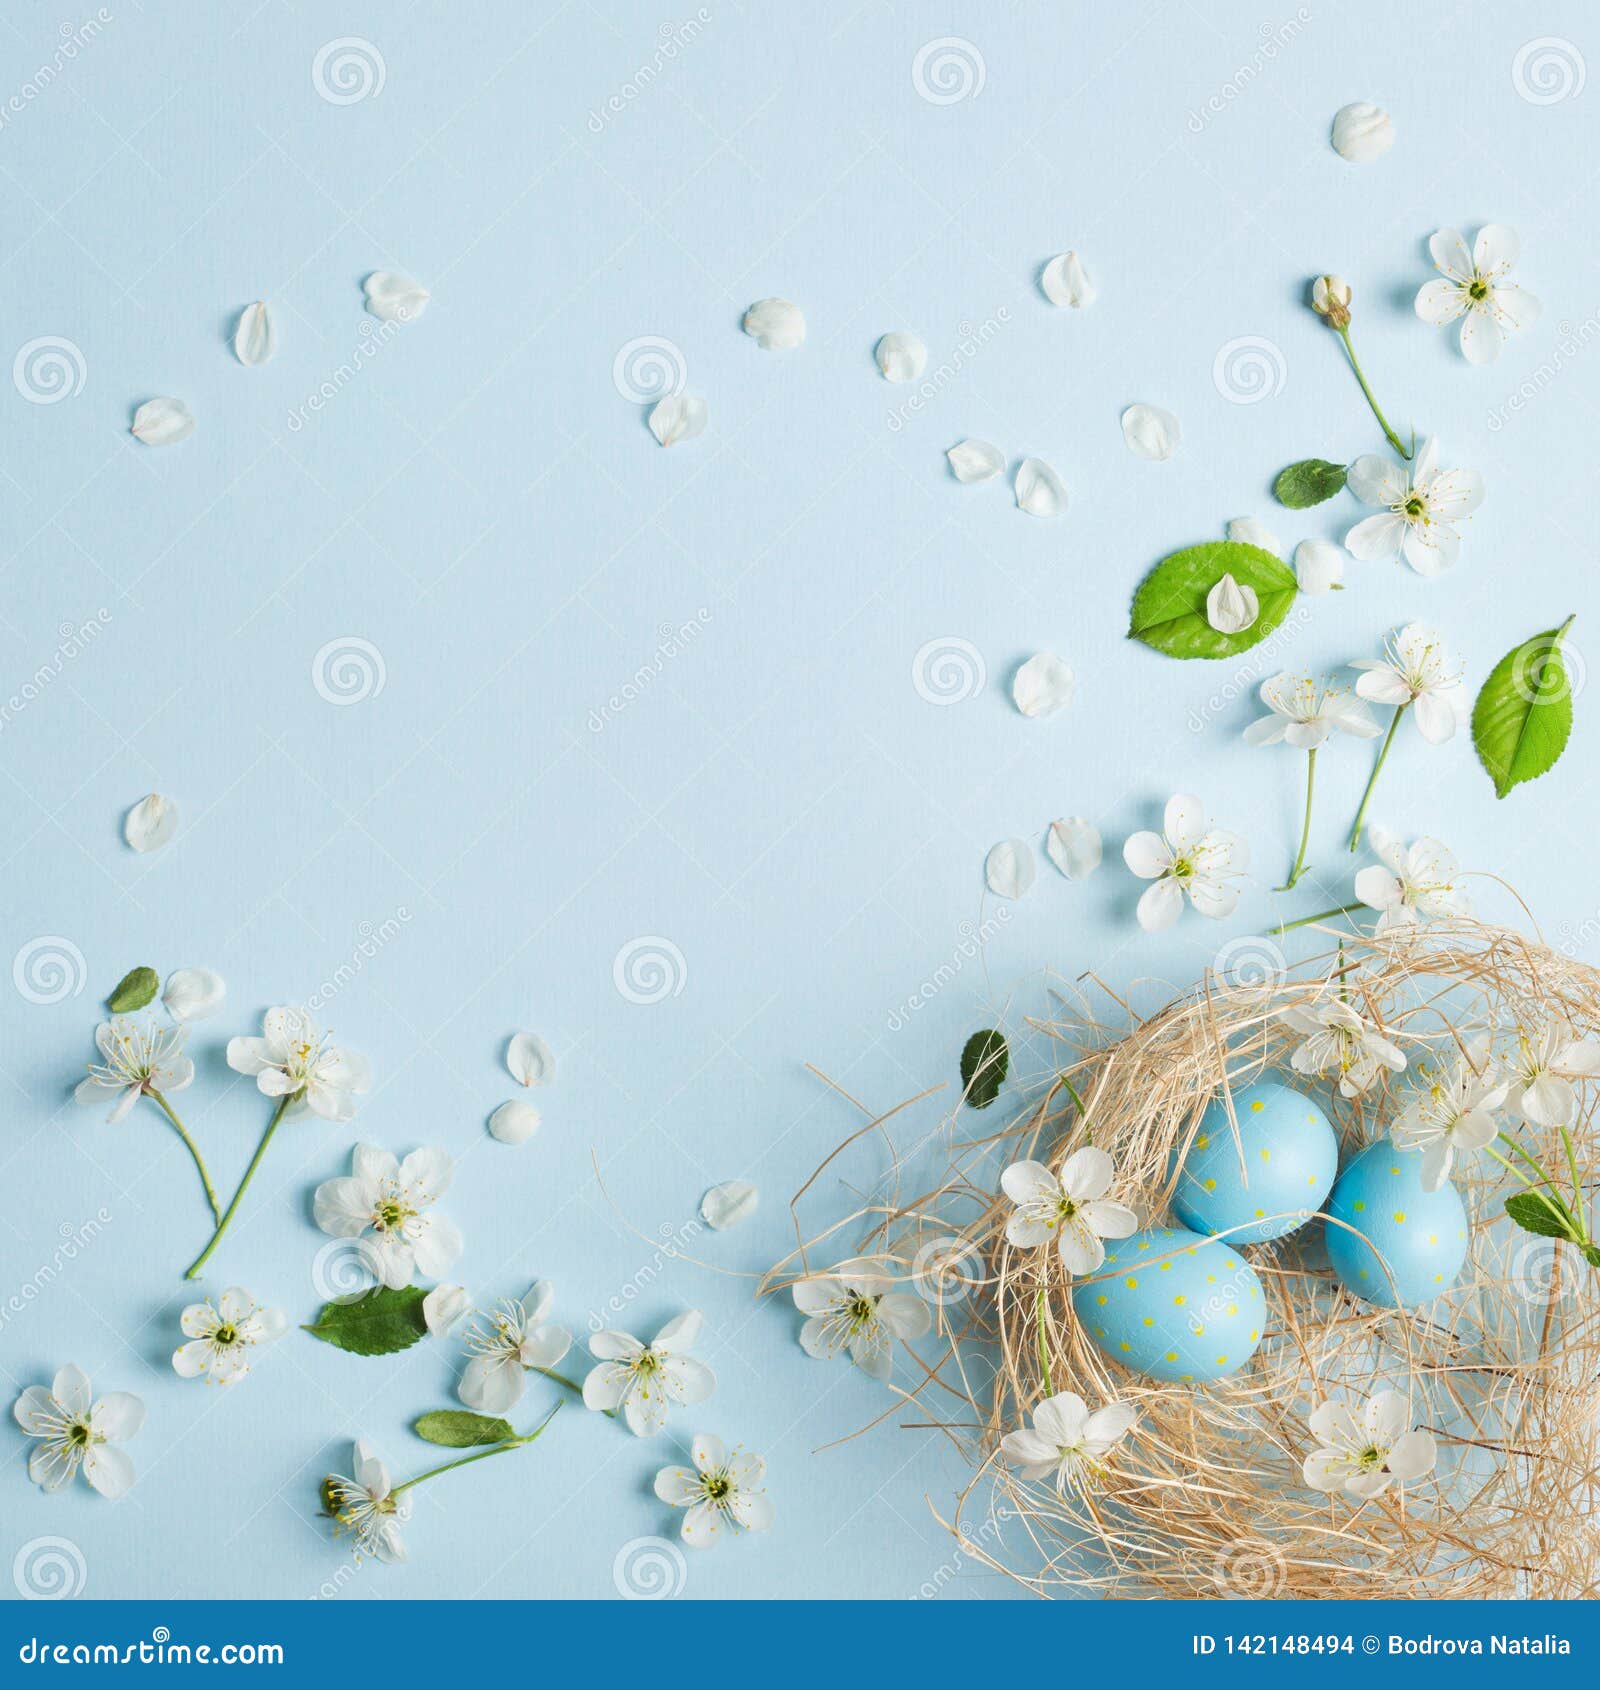 Painted Blue Easter Eggs on the Background of Cherry Blossoms Stock ...